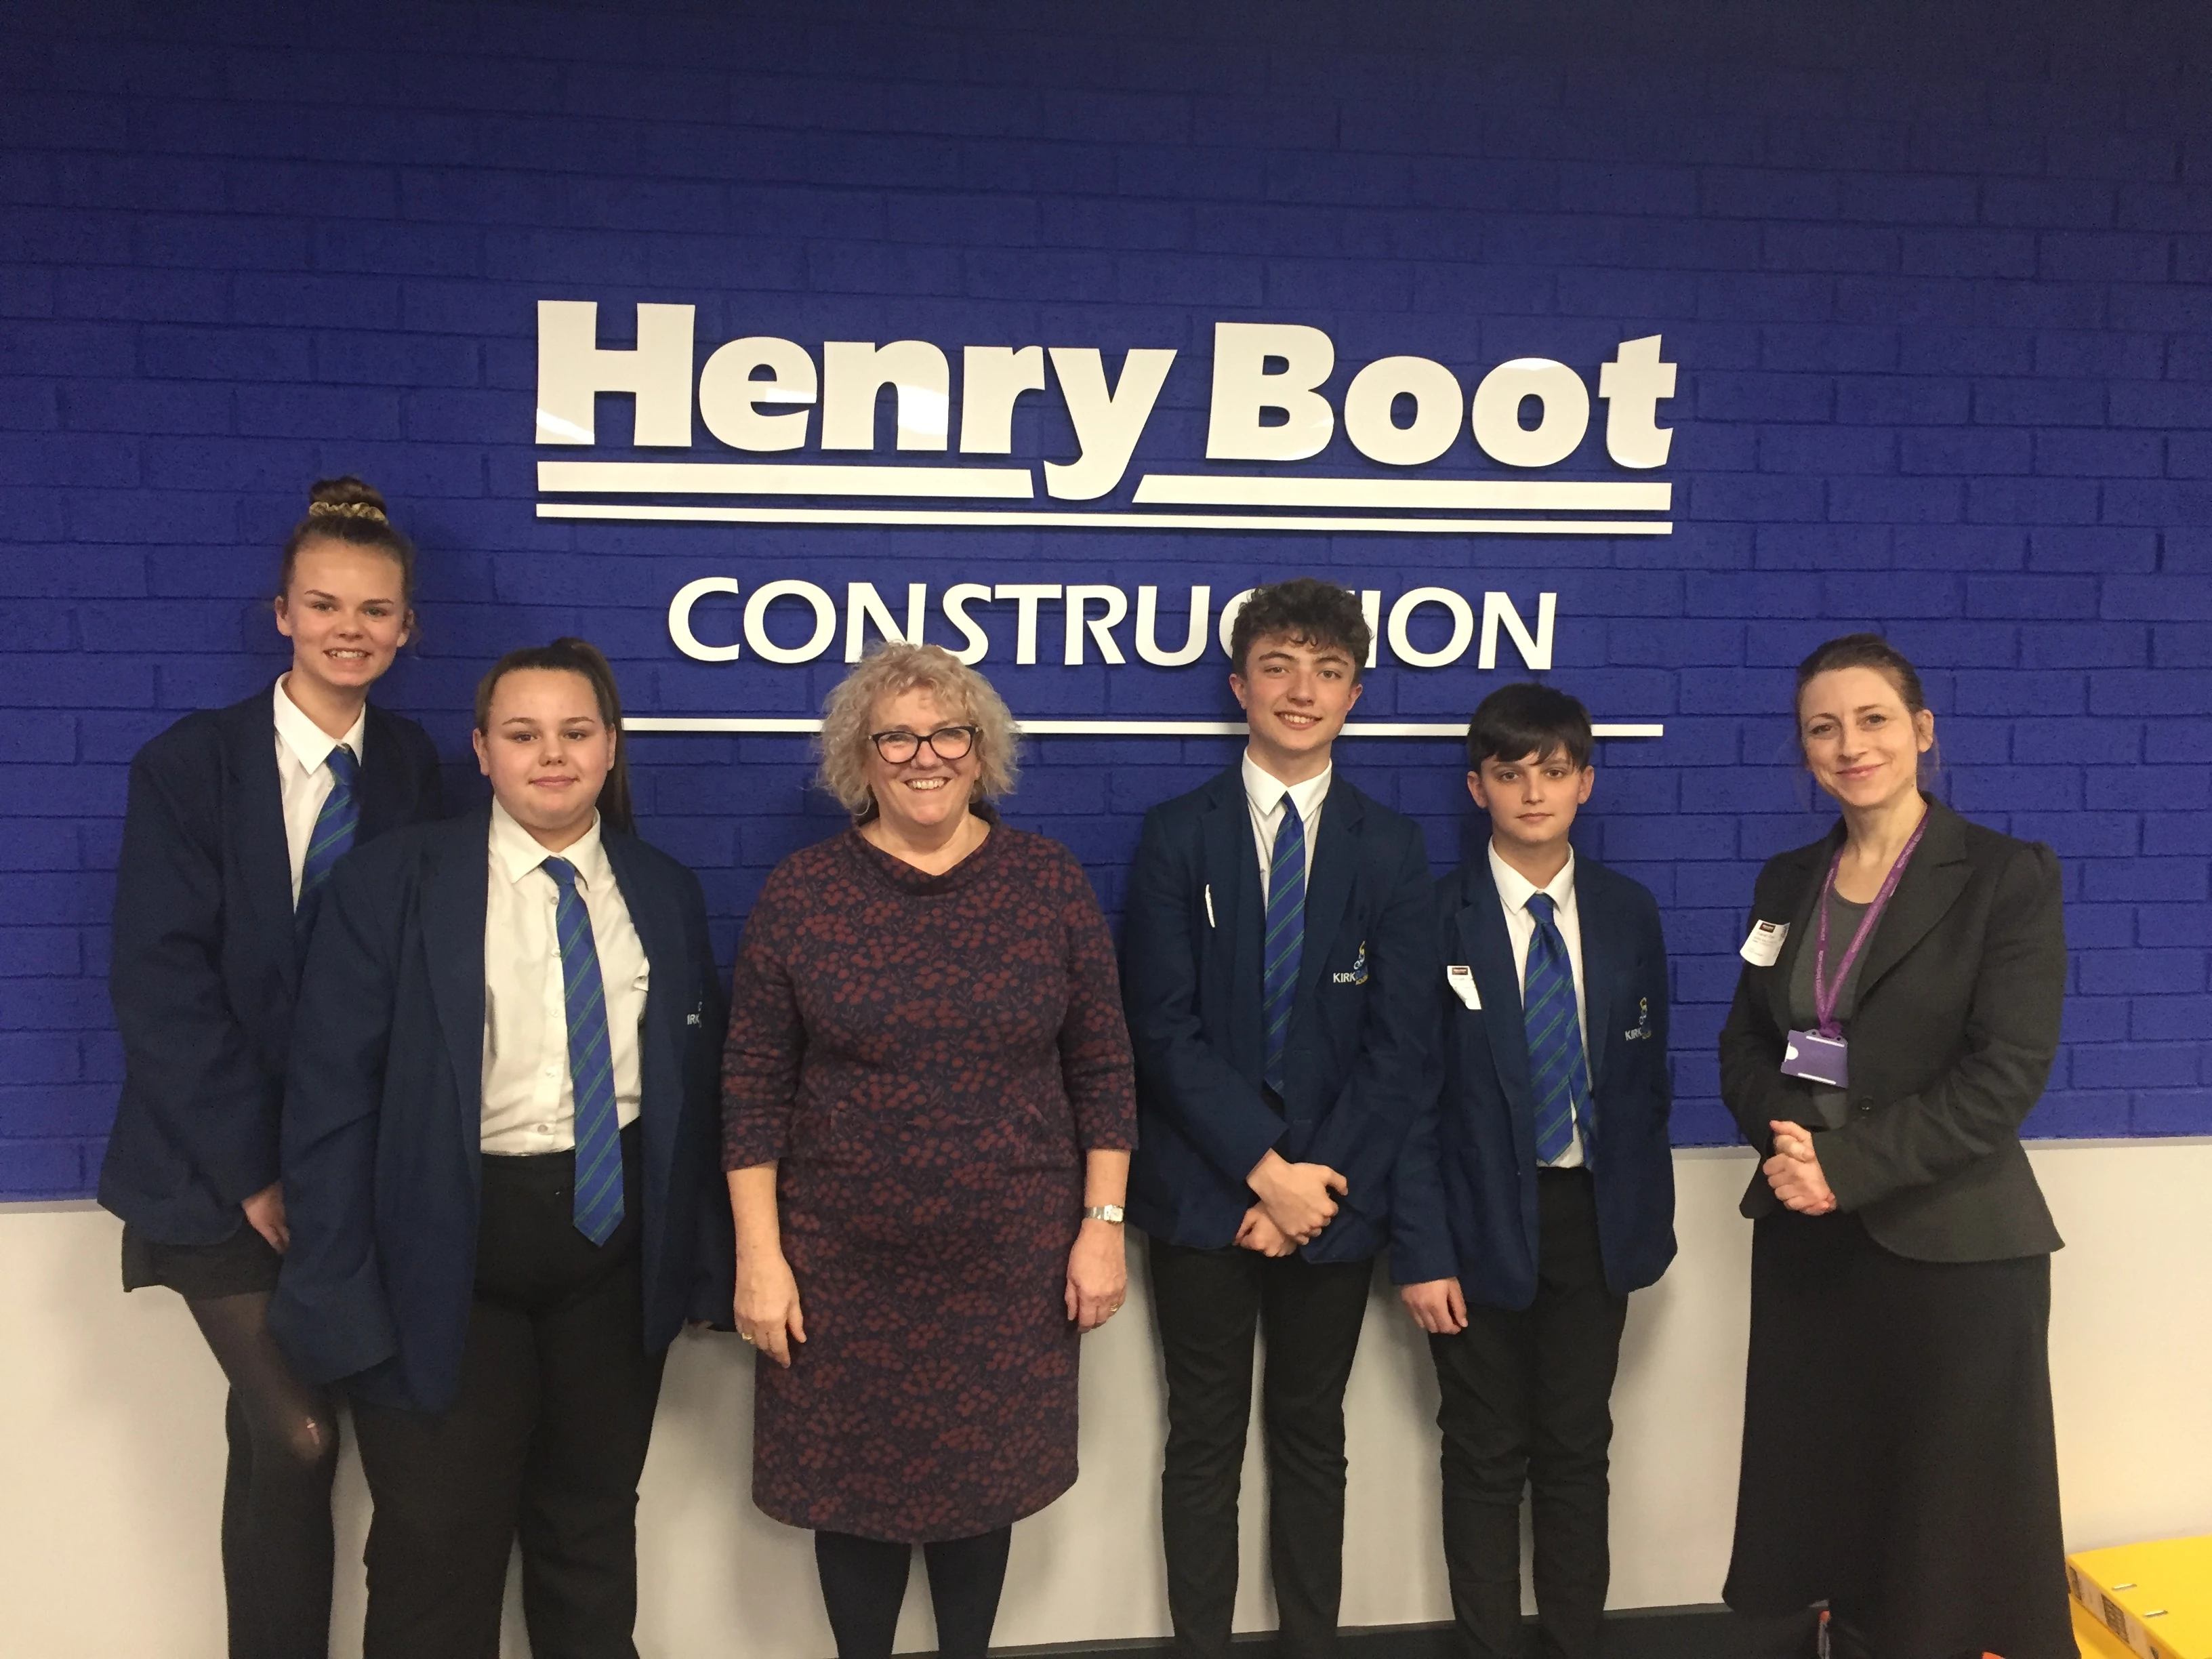 Kirk Balk Academy Year 8 students with Adeana Raper, employment & skills manager for Henry Boot Construction, and their teacher Sarah Dyer (right) during their visit to The Glass Works site in March, shortly before lockdown